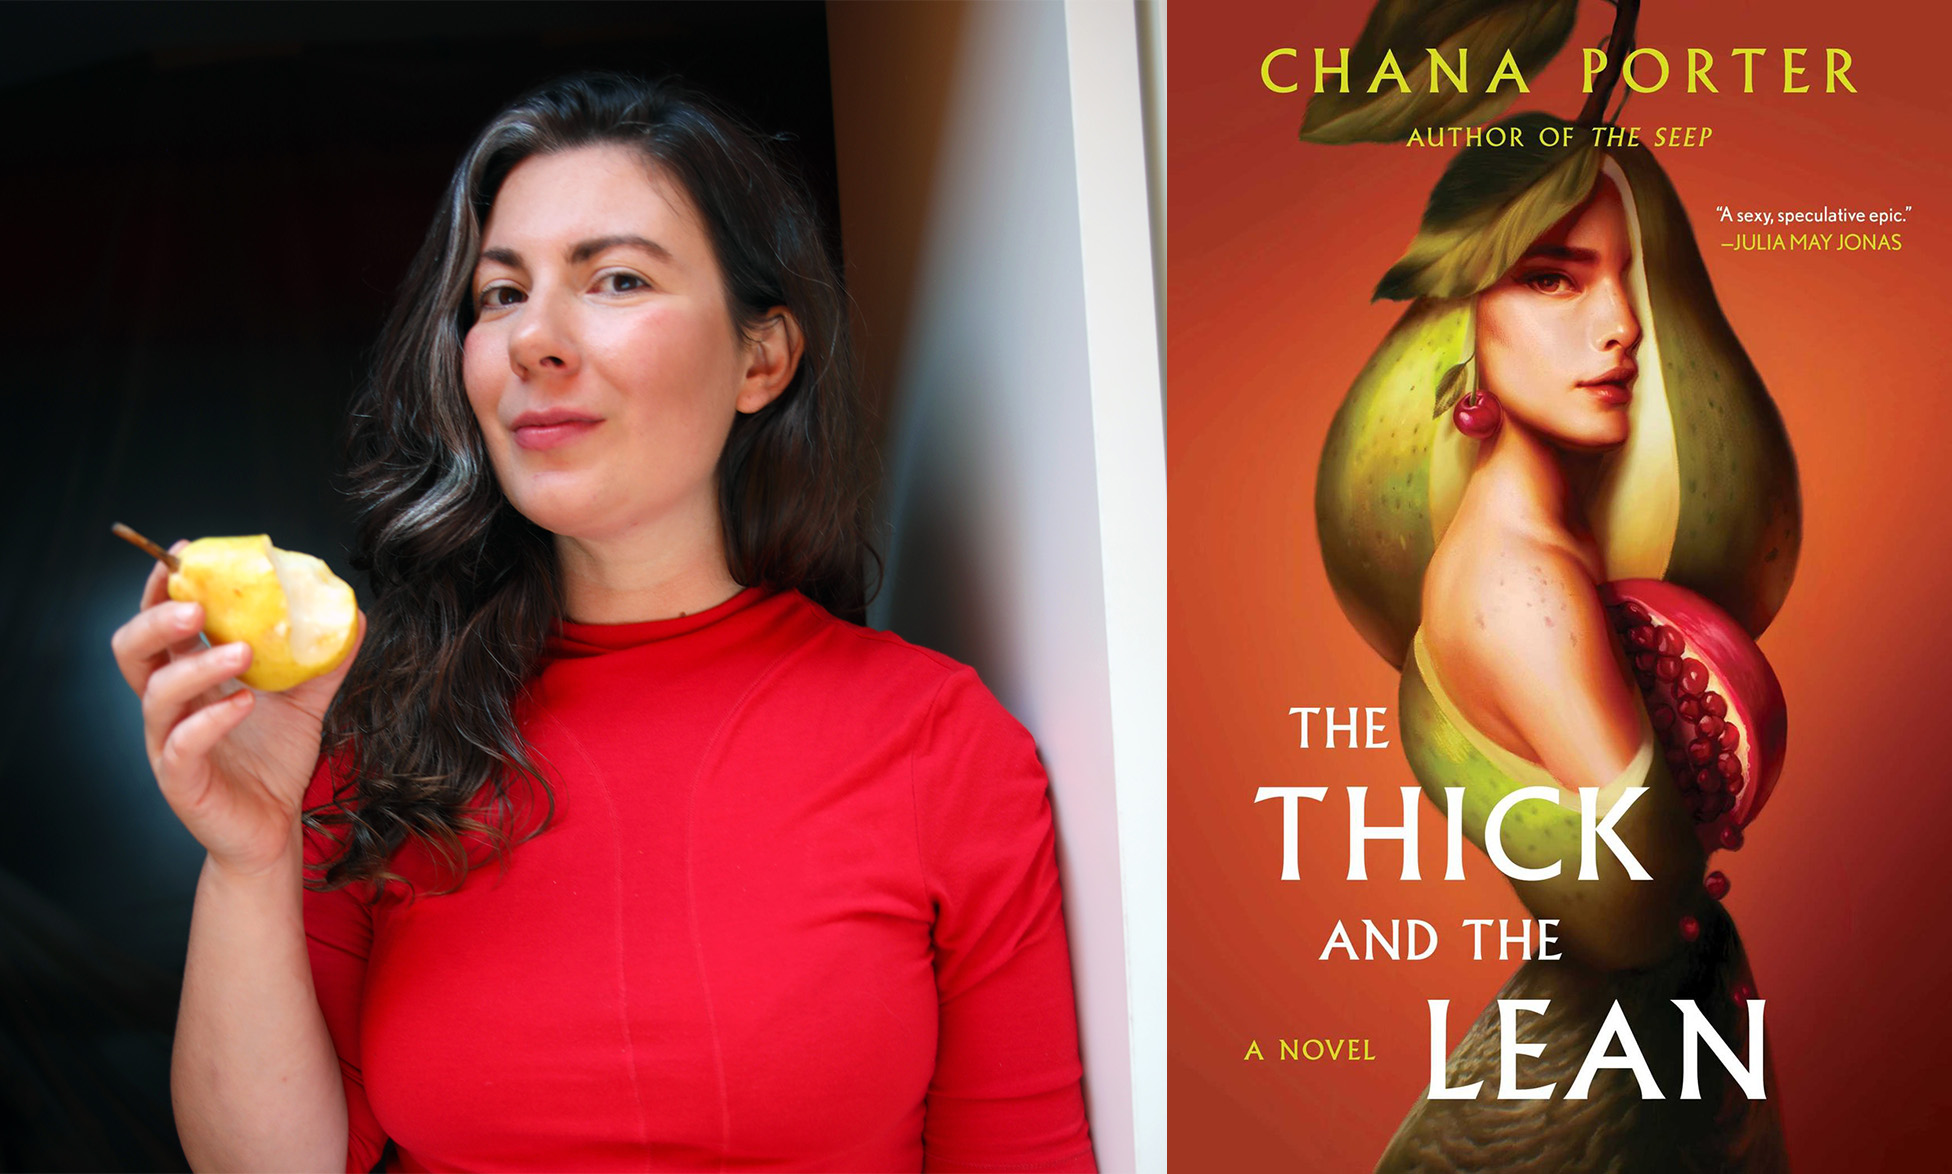 A photo of the author in a red shirt next to a shot of the book cover